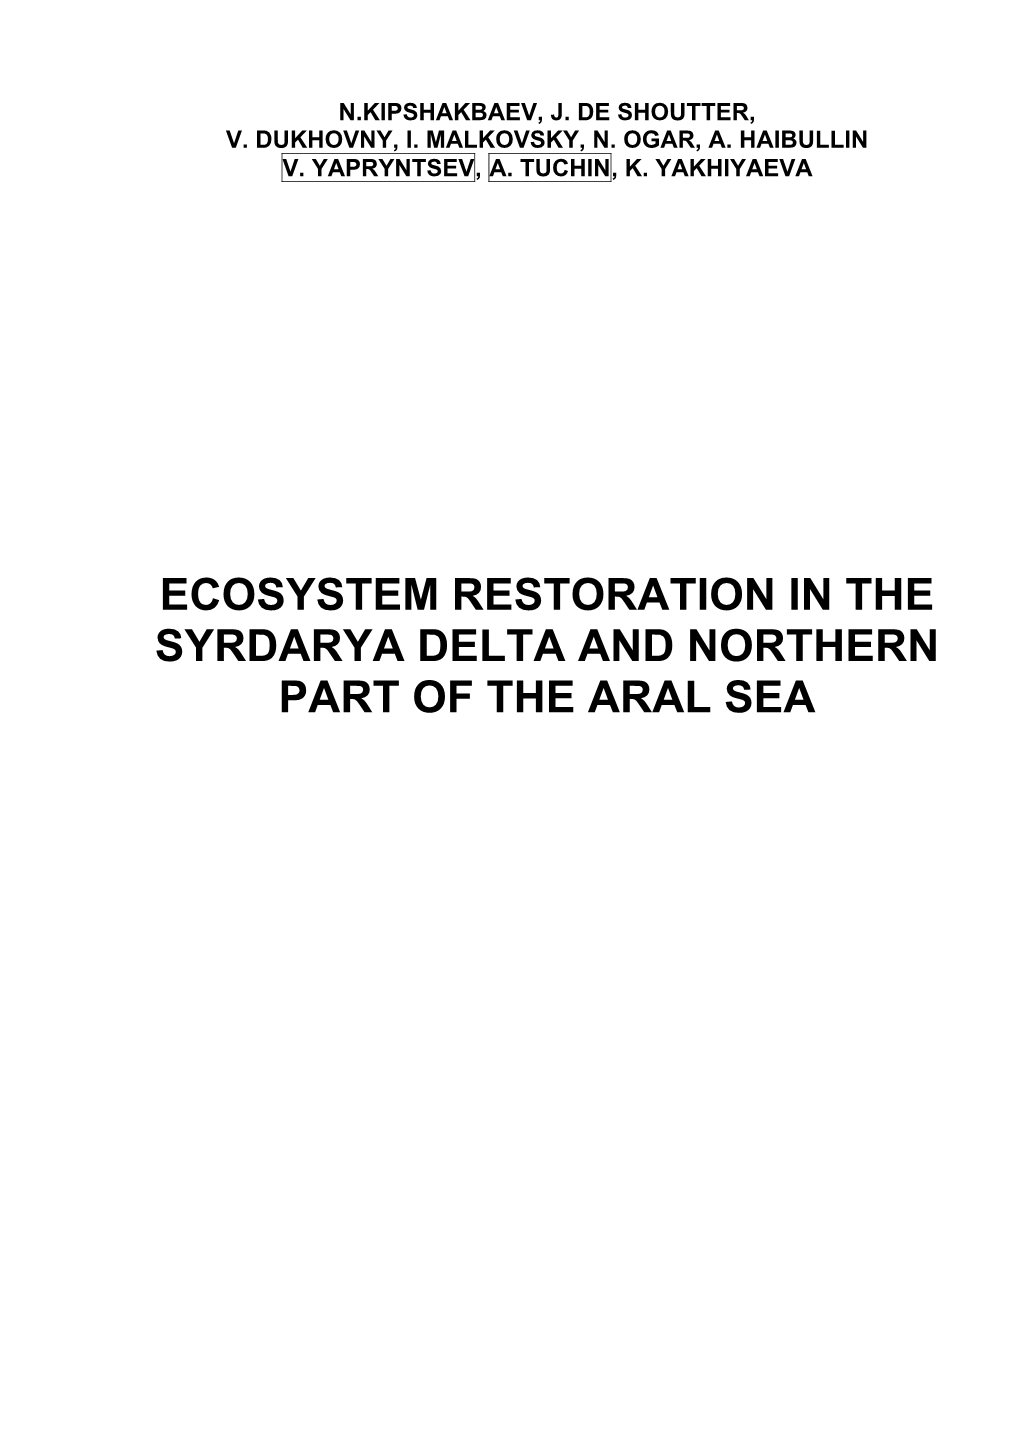 Ecosystem Restoration in the Syrdarya Delta and Northern Part of the Aral Sea